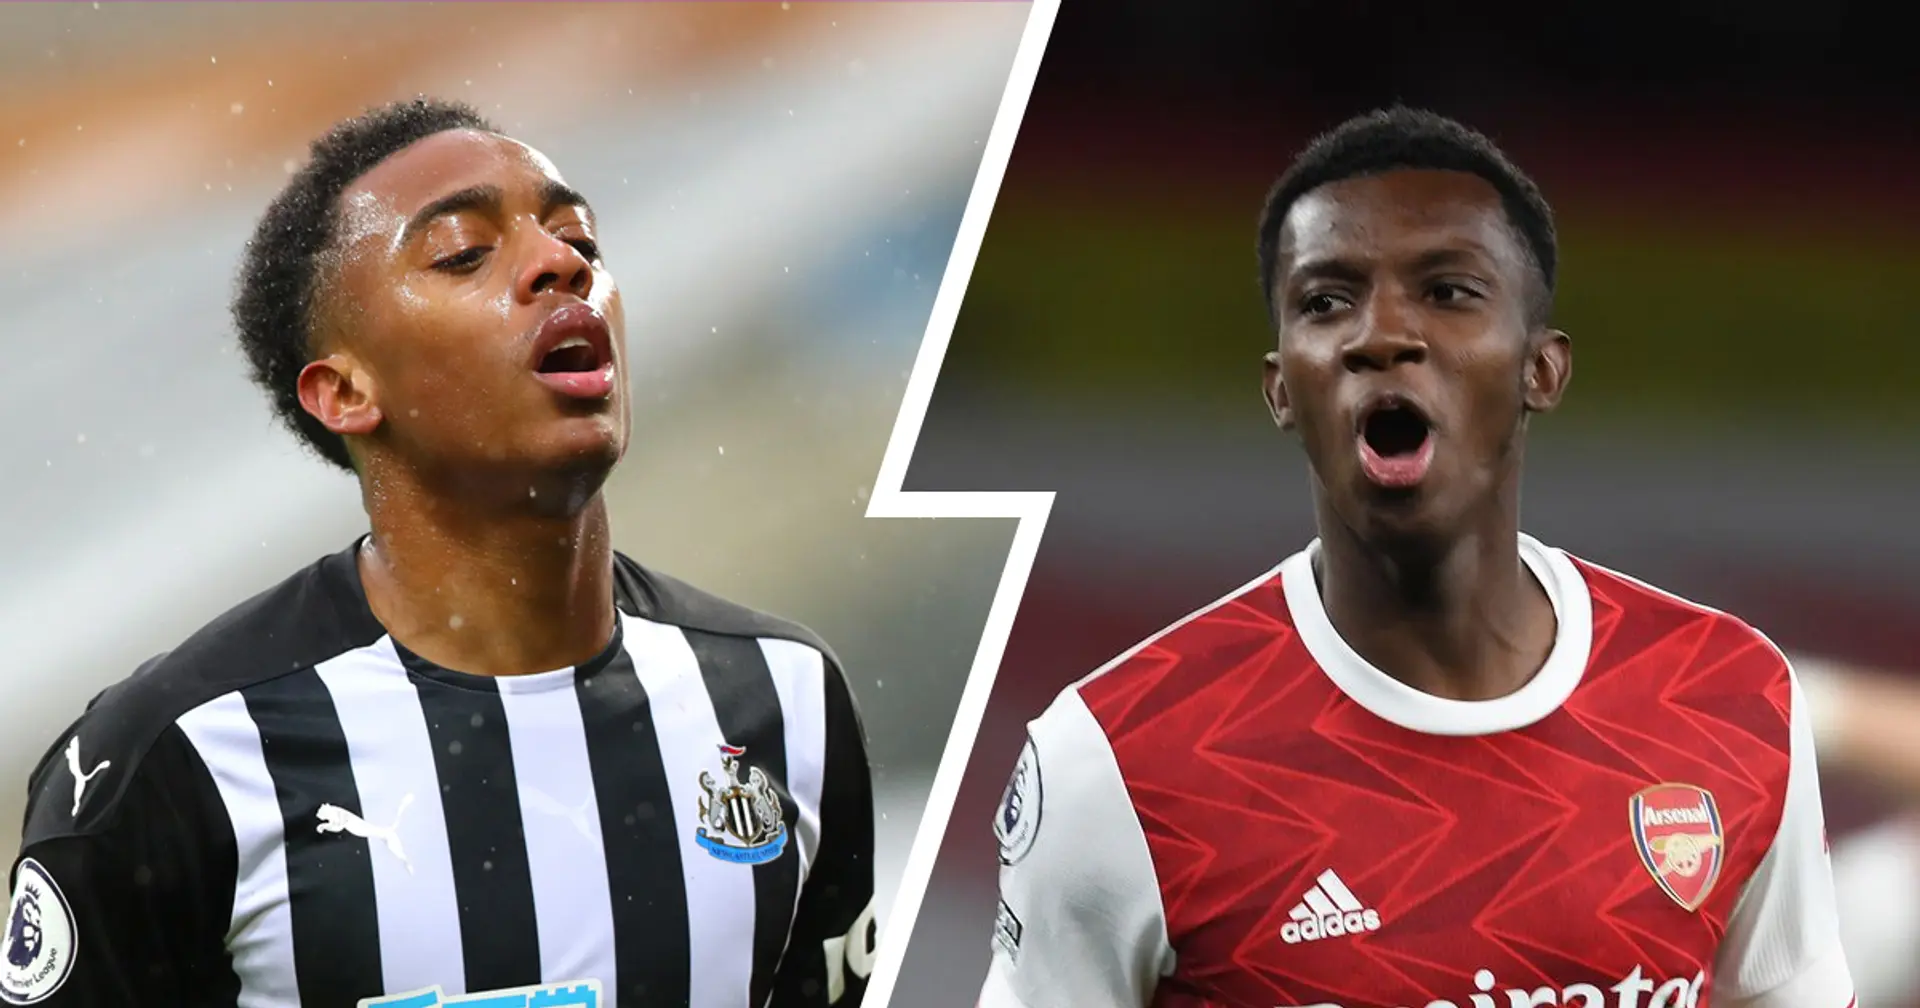 Injuries, suspensions & expected full squad: Team news for Newcastle v Arsenal